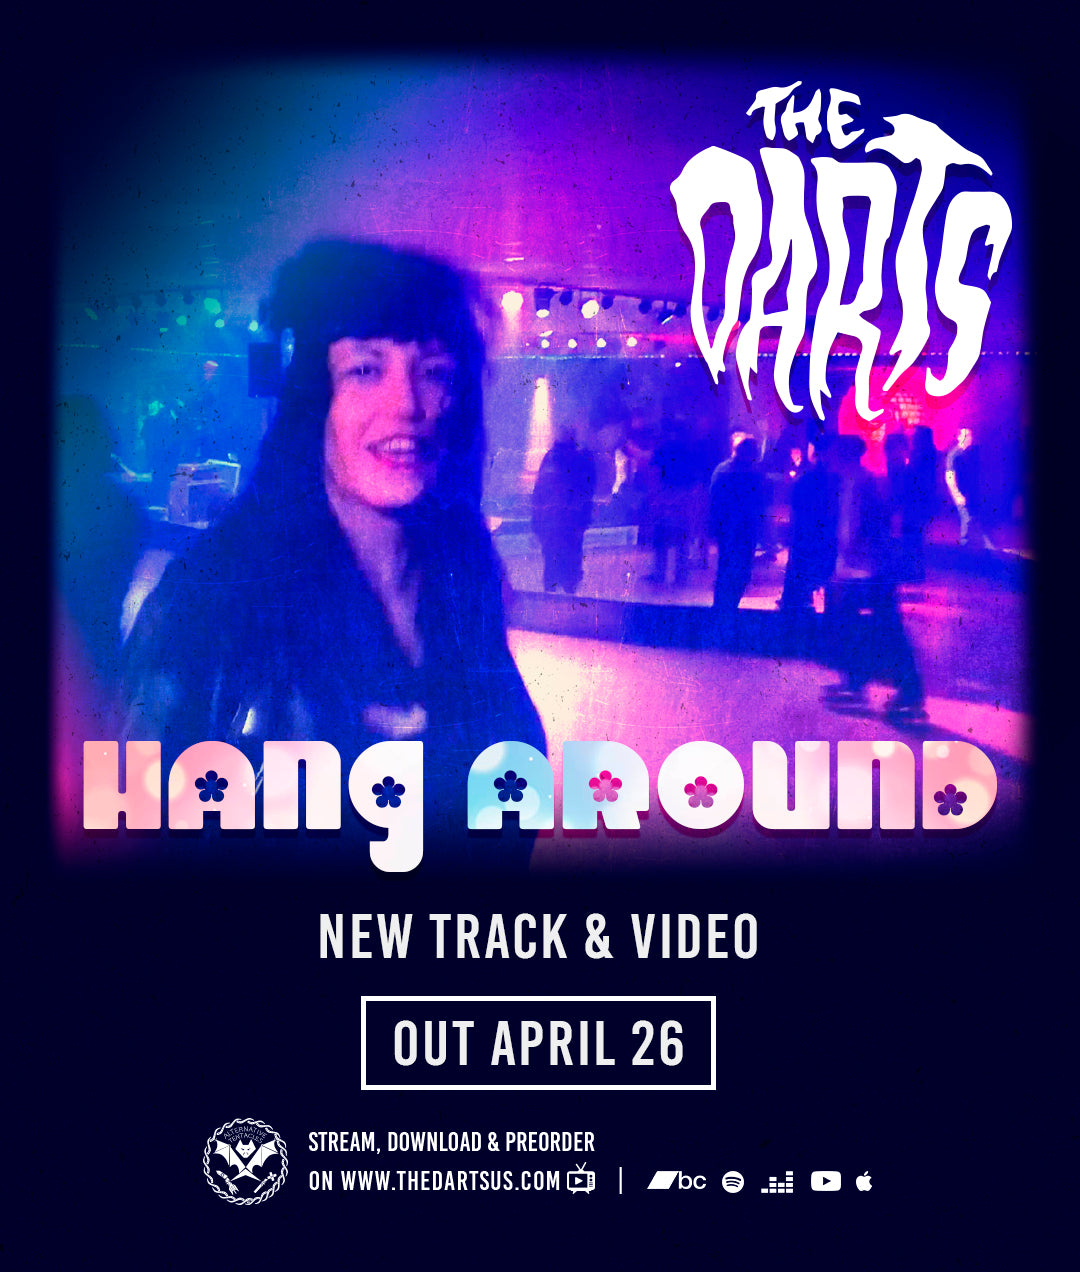 THE DARTS TO DROP BRAND NEW MUSIC VIDEO FOR "HANG AROUND" FRIDAY, APRIL 26TH